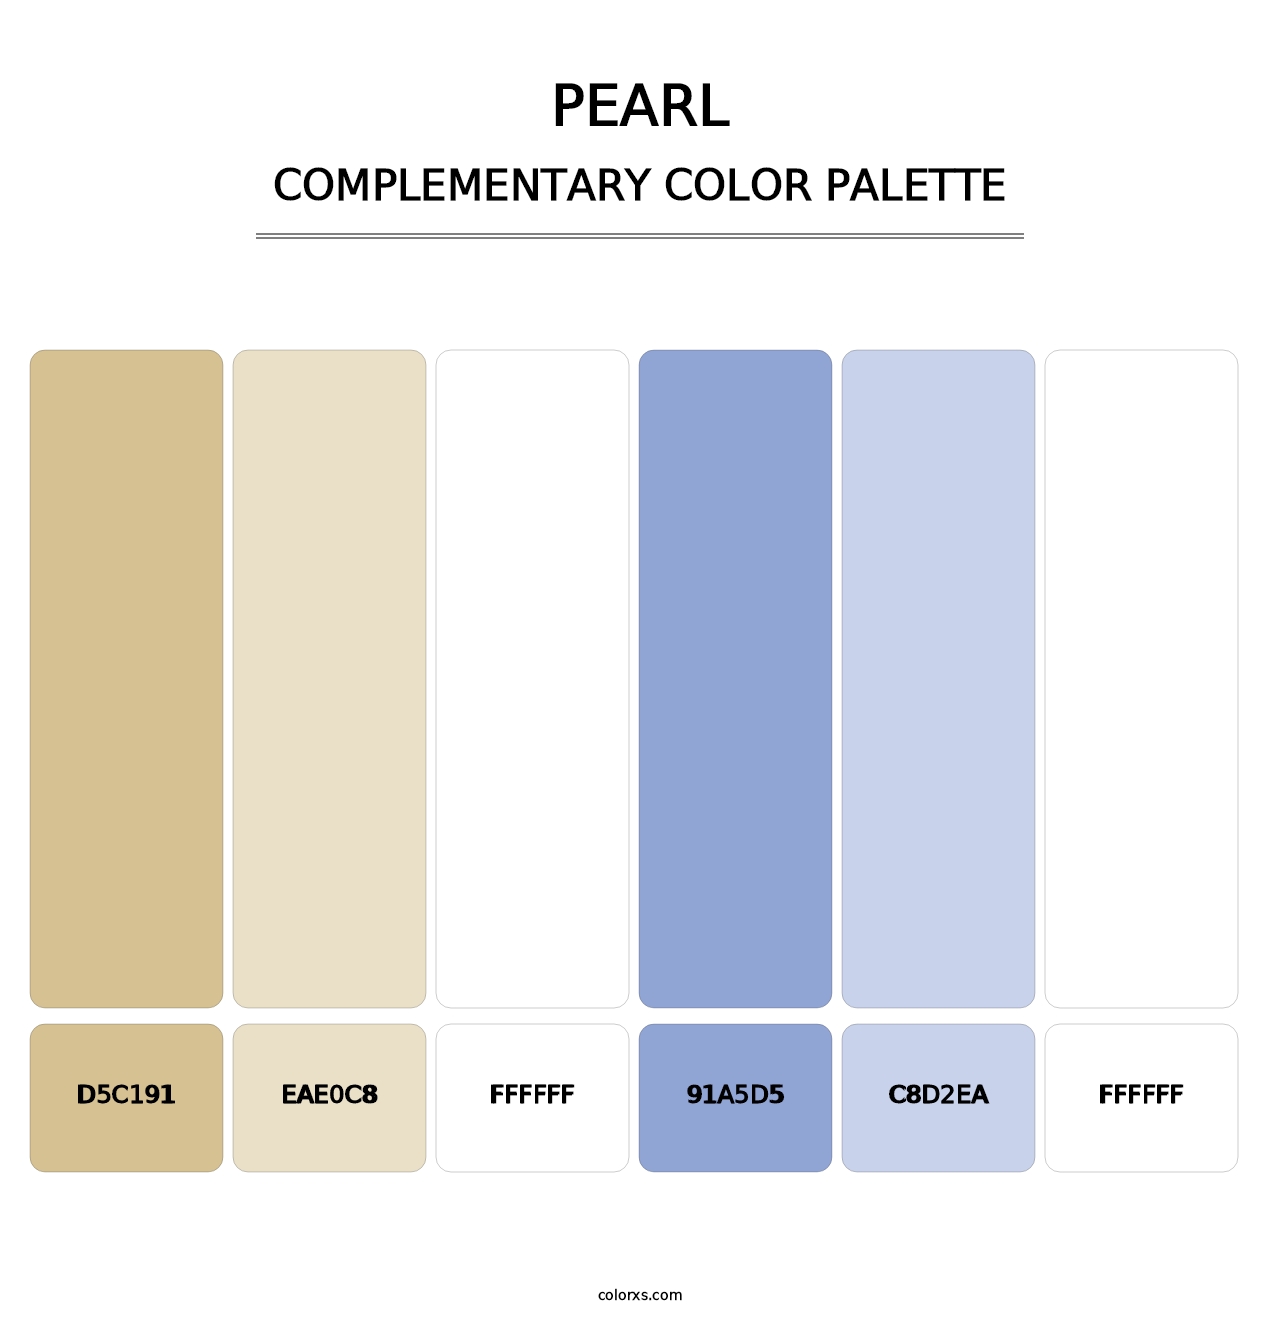 Pearl - Complementary Color Palette